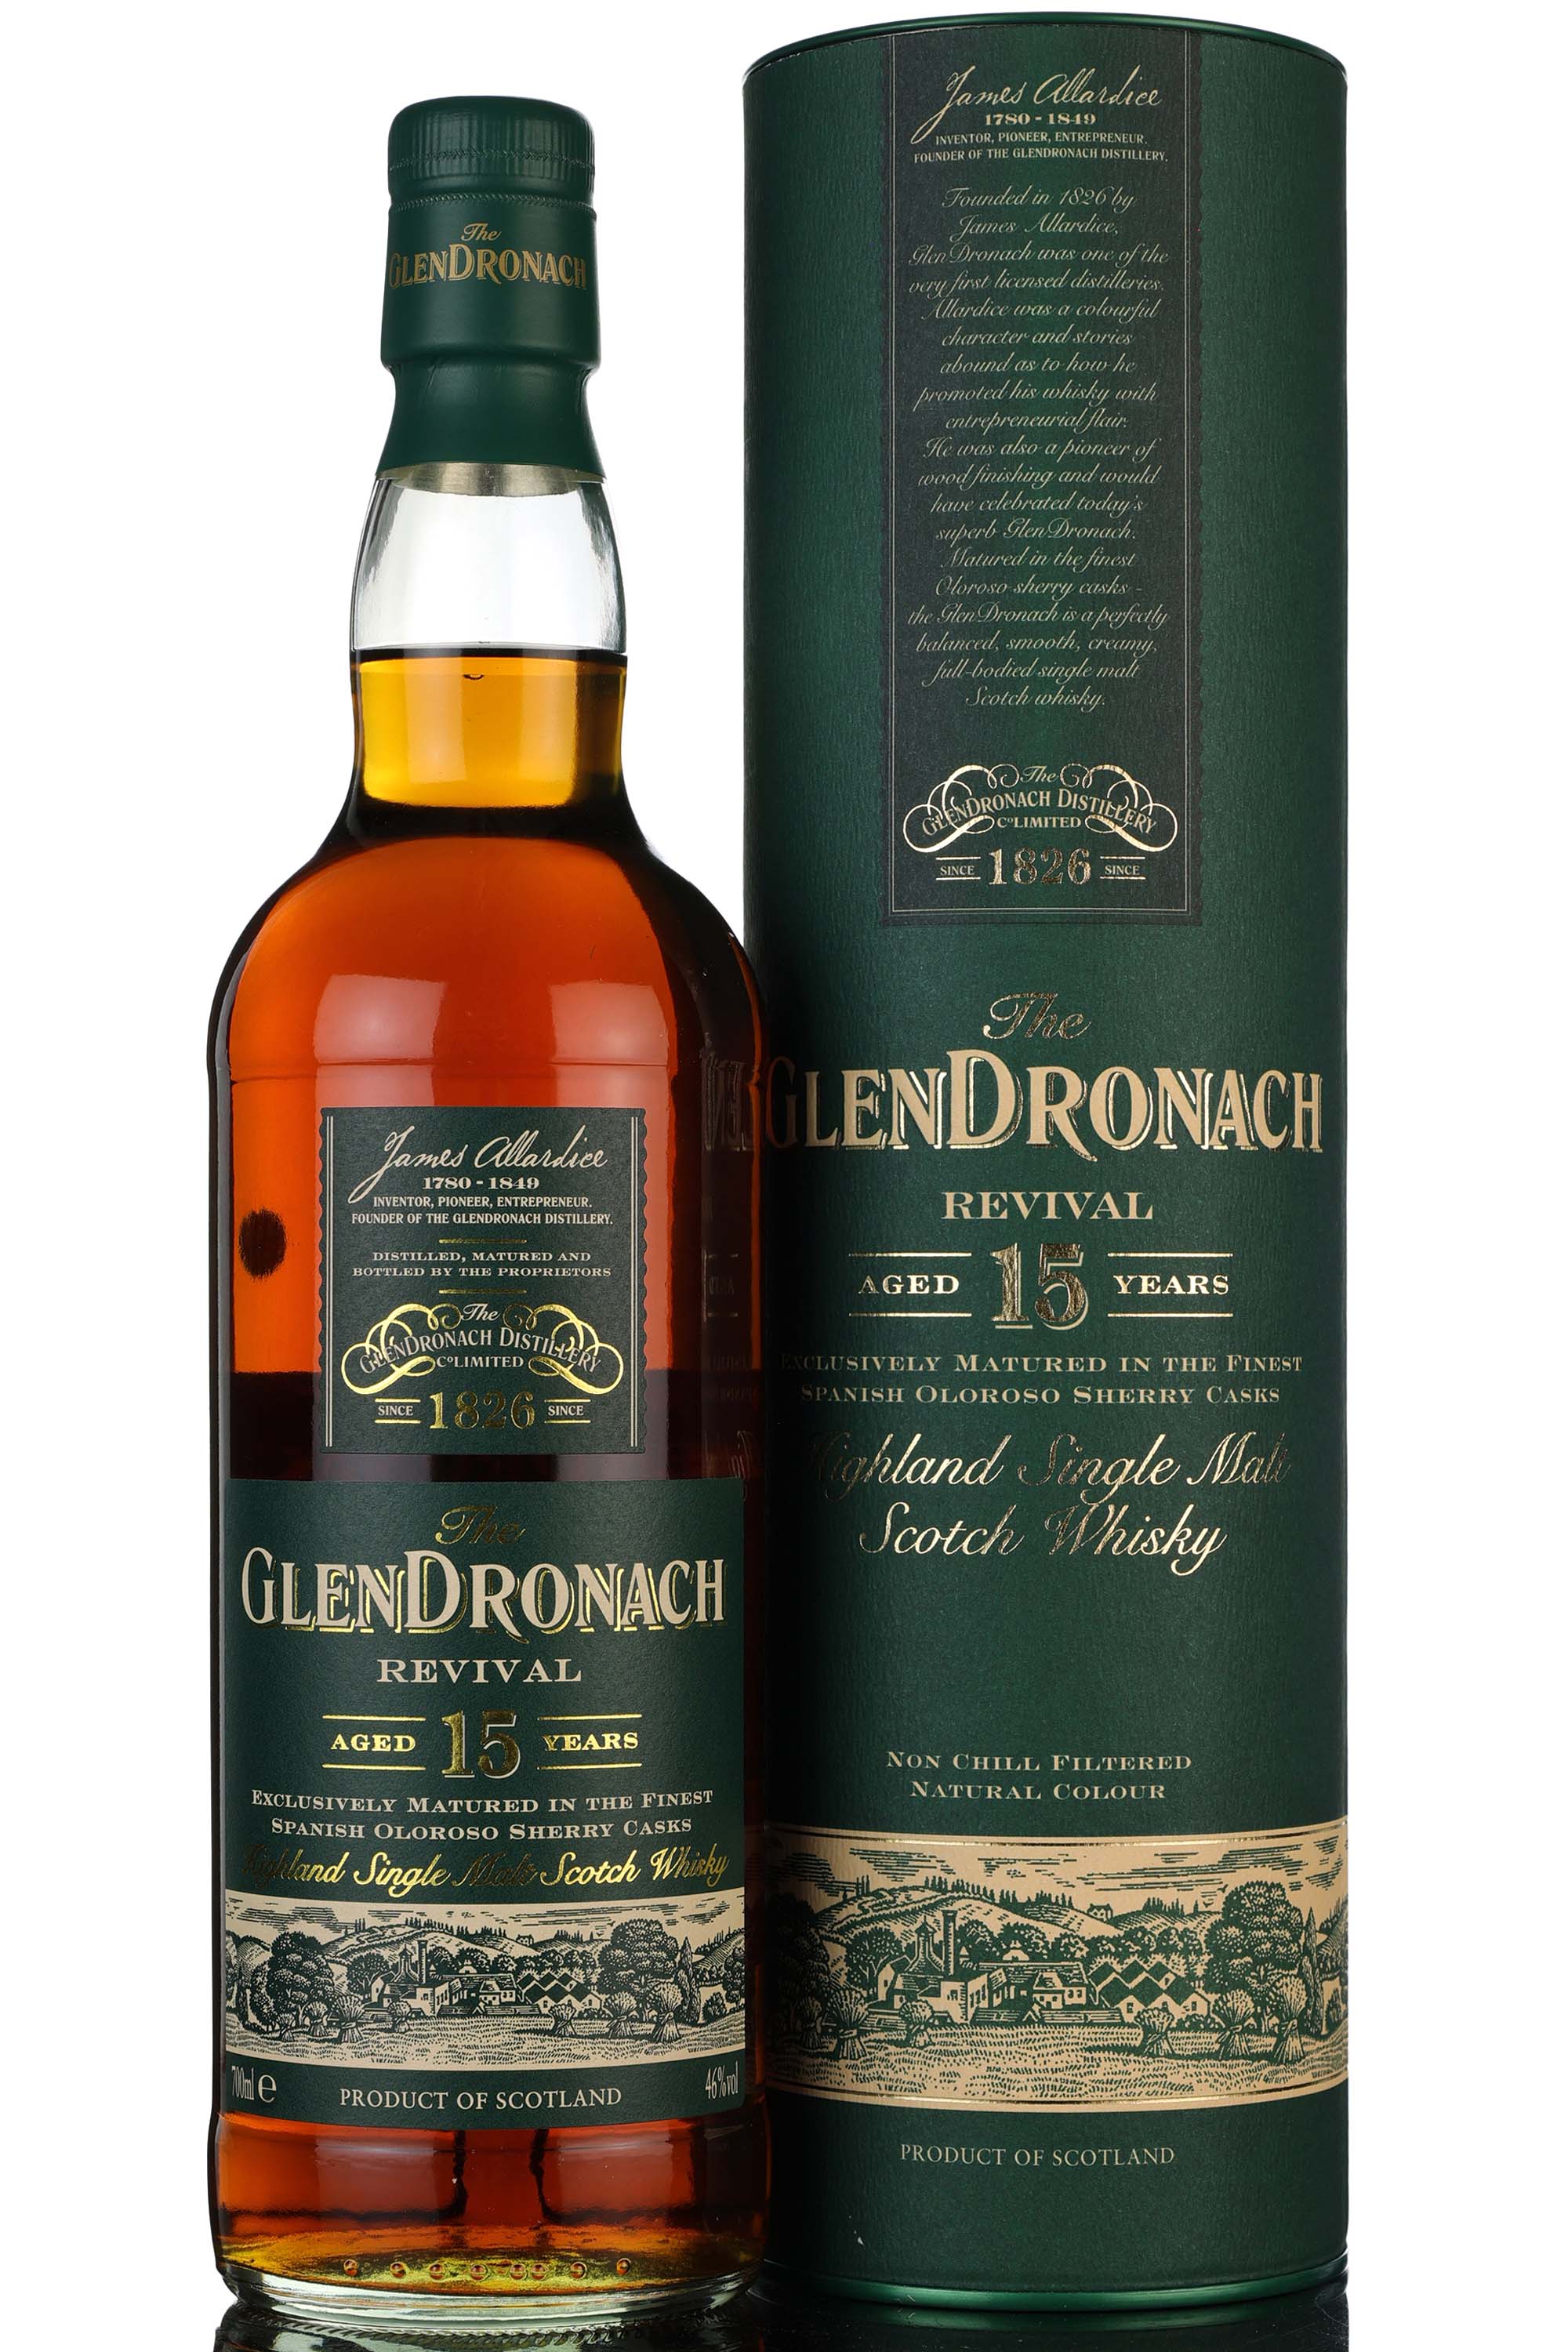 Glendronach 15 Year Old - Revival - 2014 Release